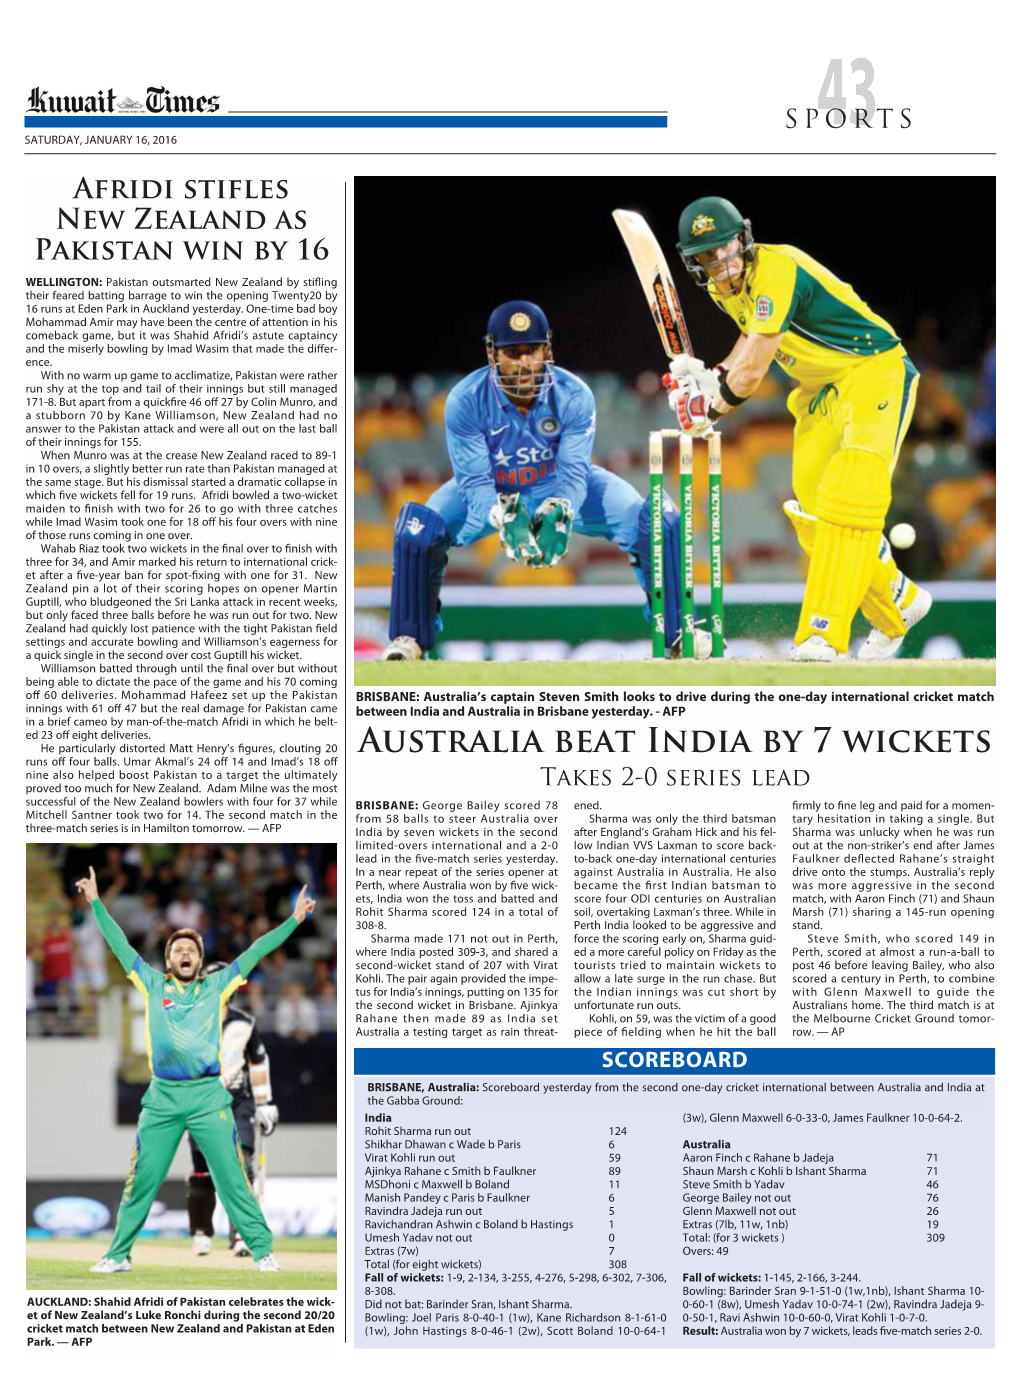 Australia Beat India by 7 Wickets Runs Off Four Balls